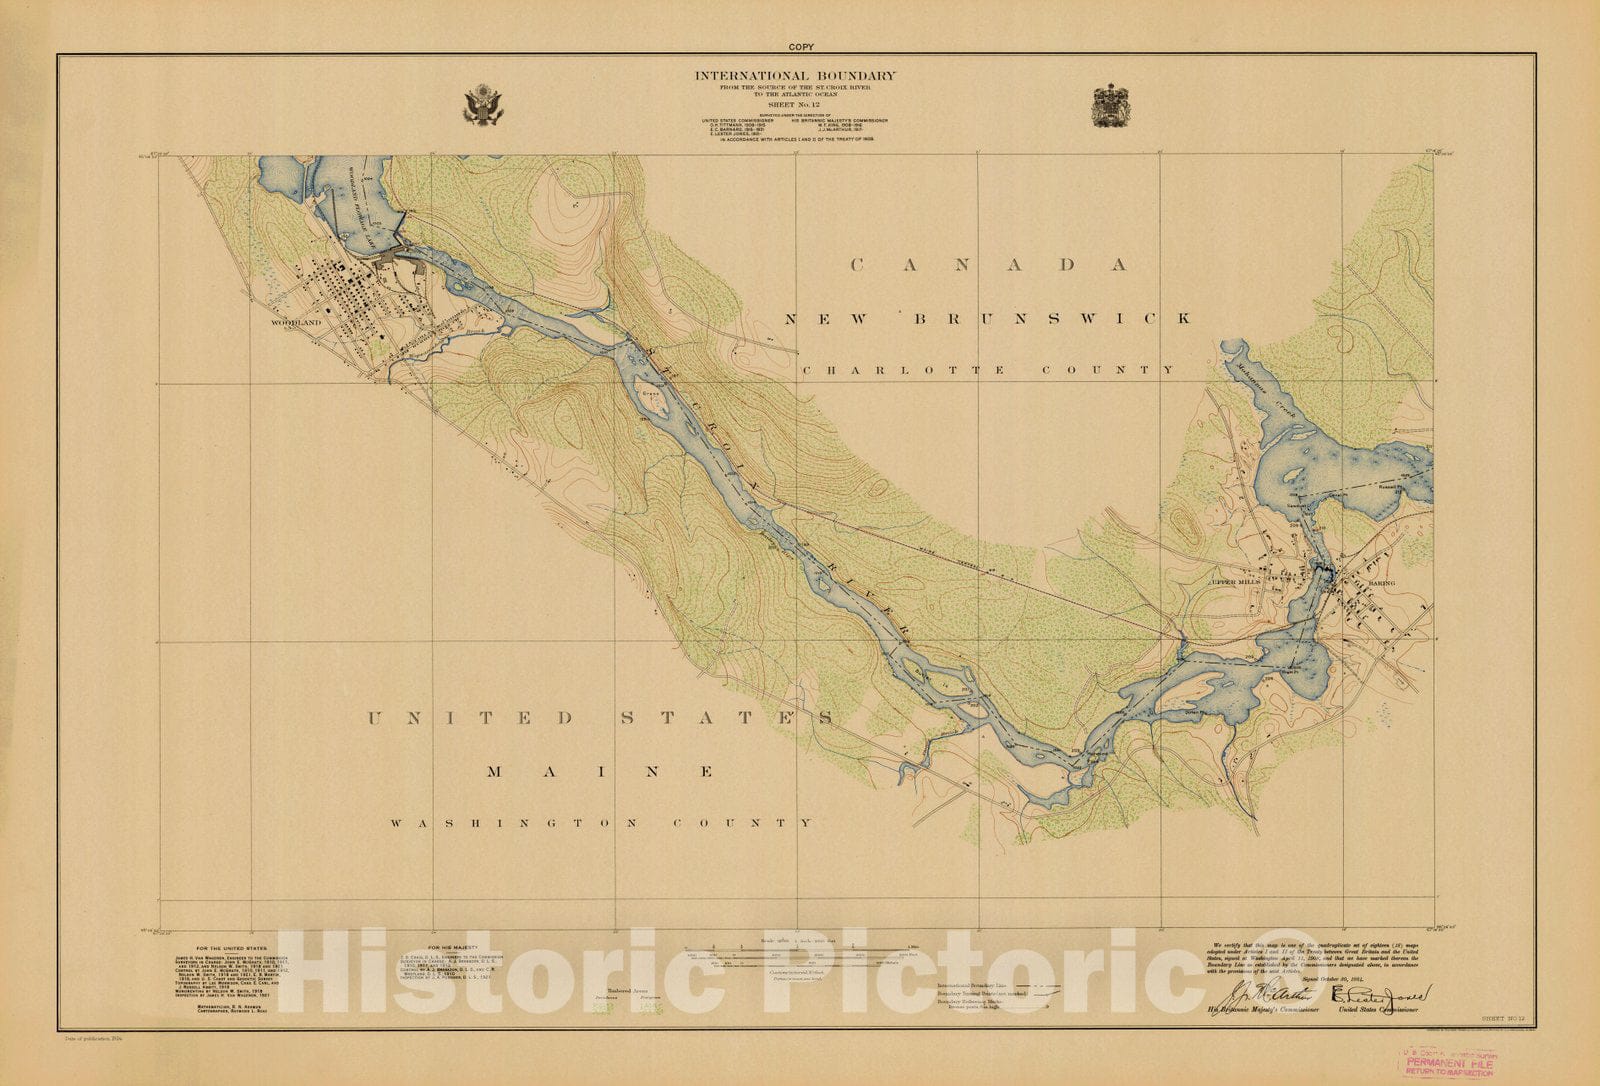 Historic Nautical Map - International Boundary, From The Source Of The St. Croix River To The Atlantic Ocean, Sheet No.12, ME, 1924 NOAA Topographic - Vintage Wall Art